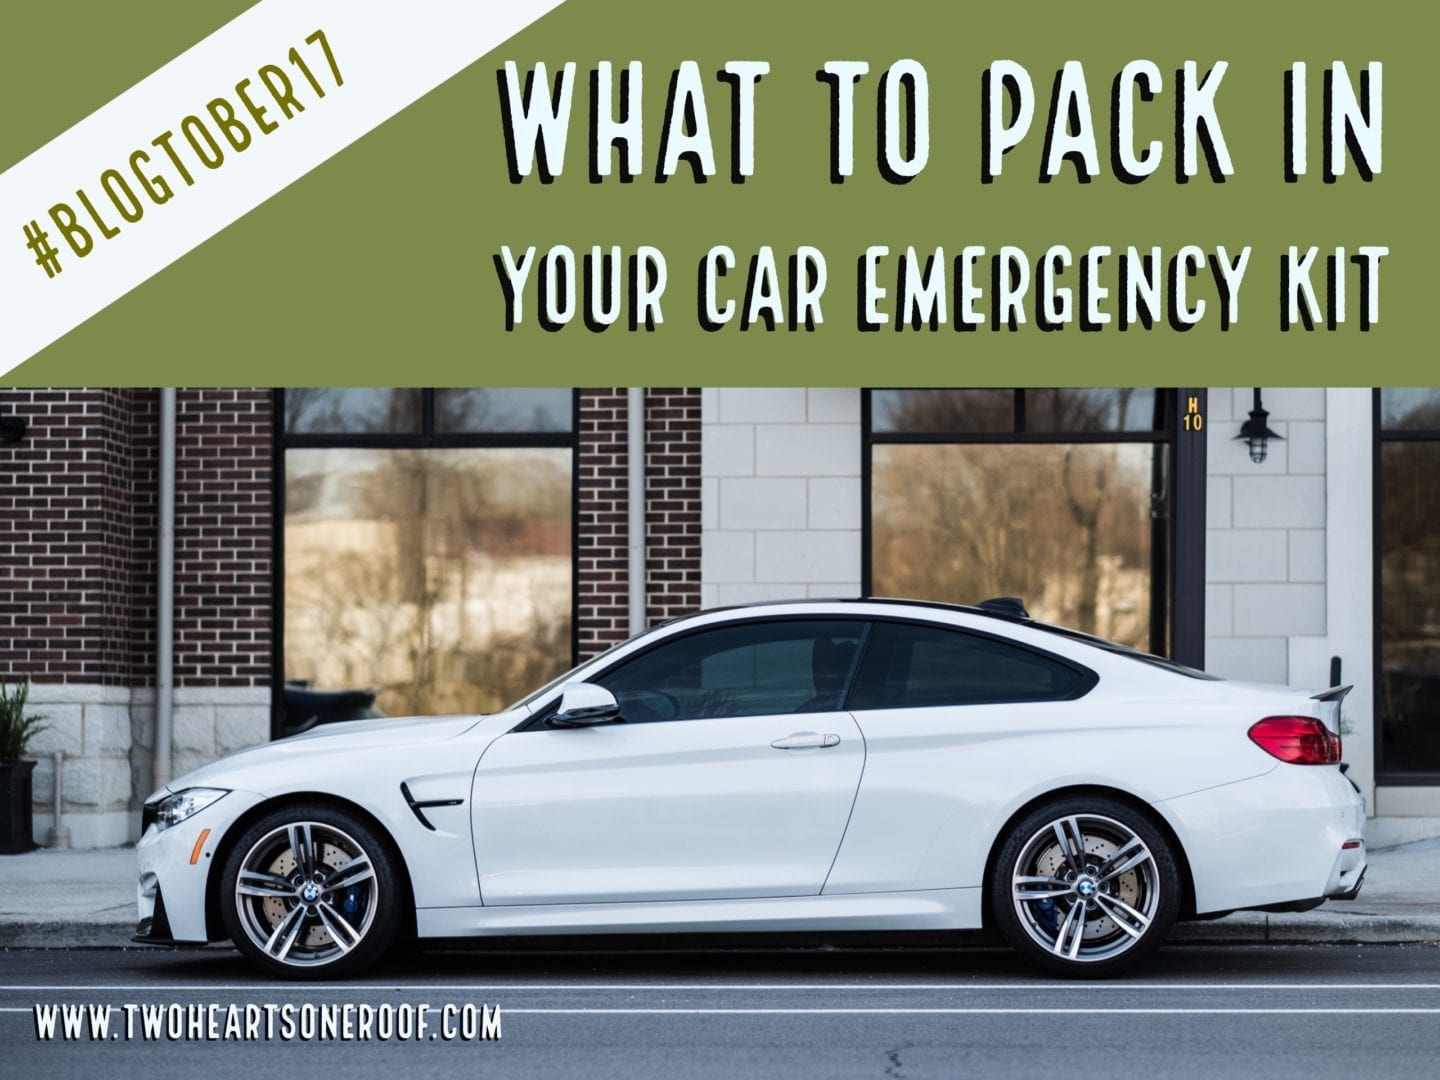 What to Pack in Your Car Emergency Kit – Blogtober 17